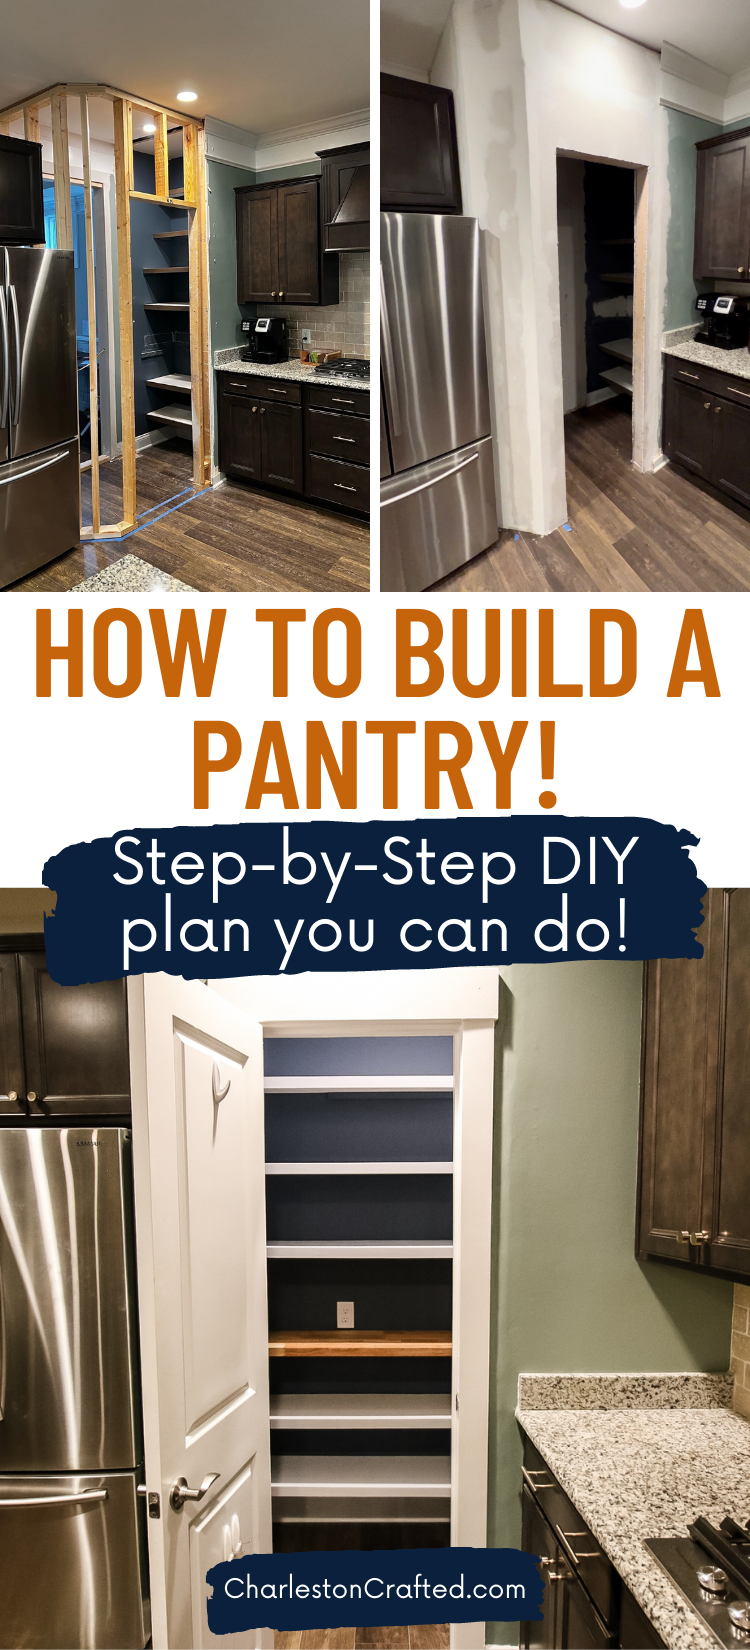 Make Meal Prep Easy with a Custom Kitchen Pantry